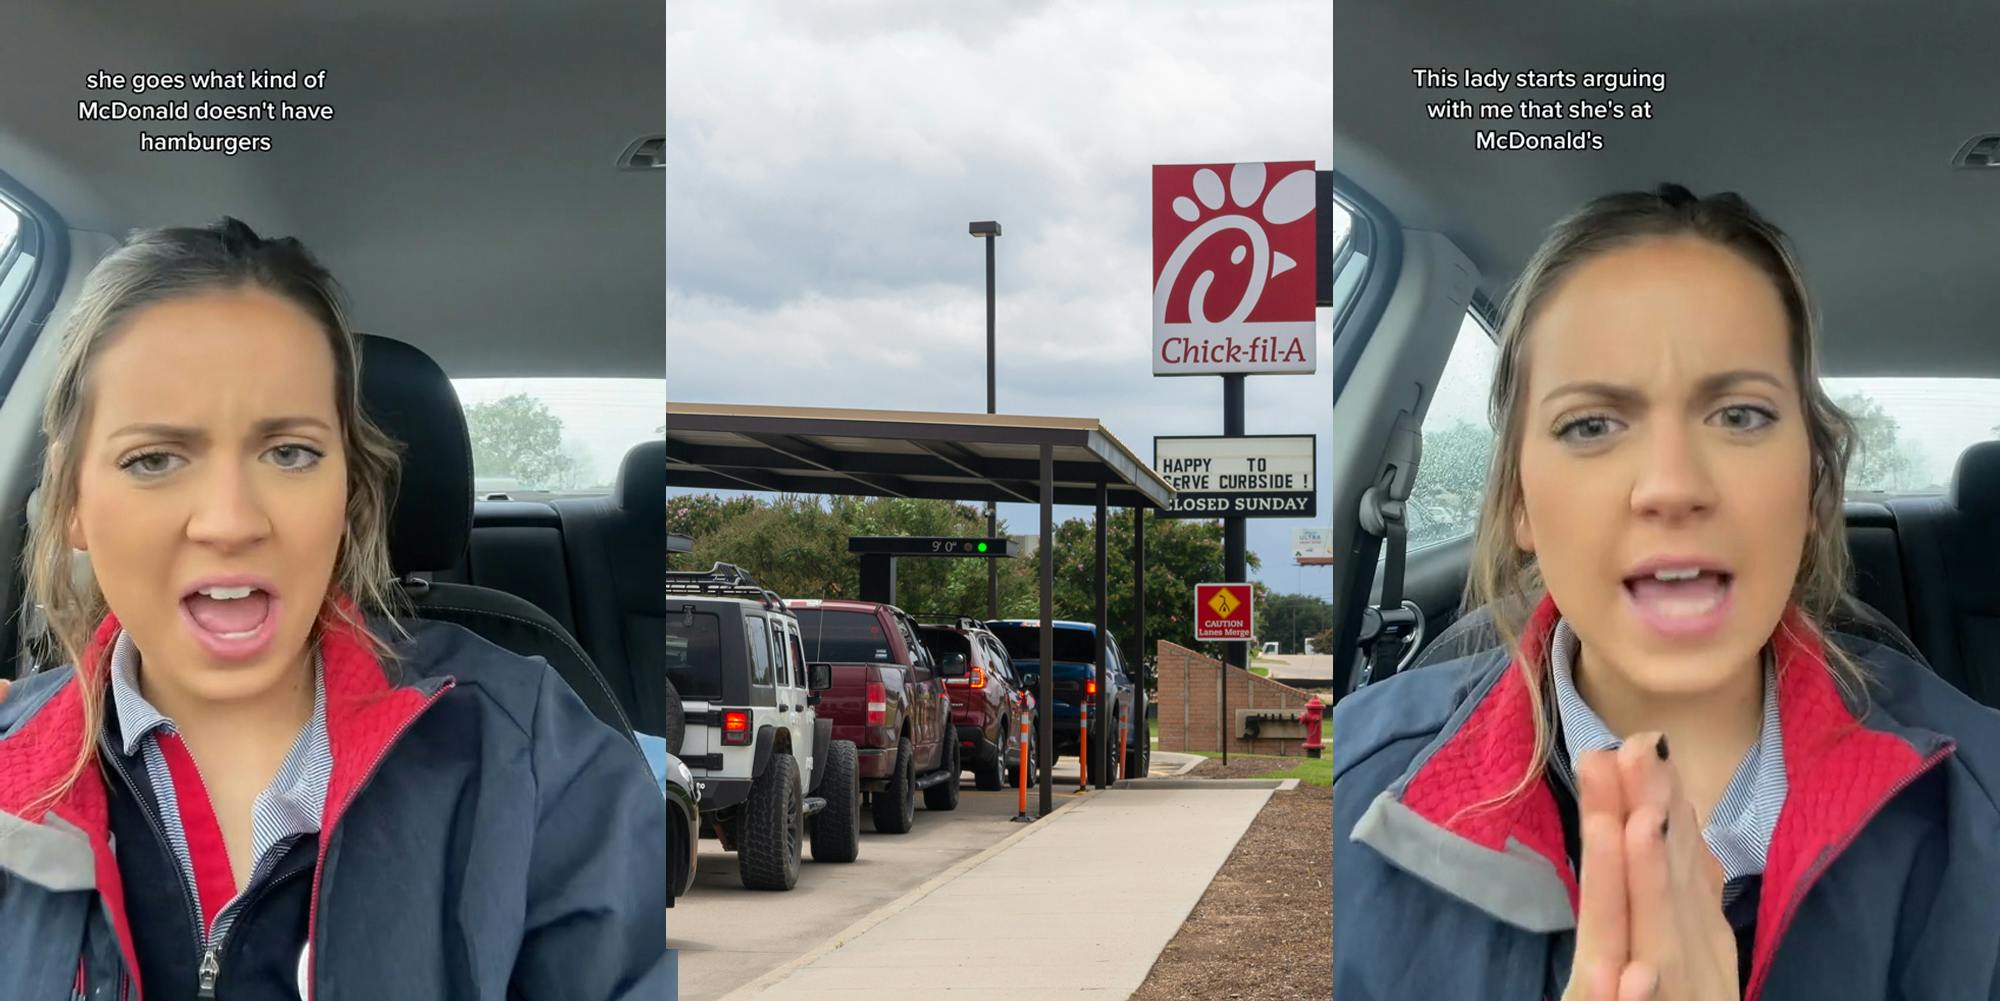 ‘You are at Chick-fil-A’: Chick-fil-A worker says customer insisted on getting a hamburger, thought she was at McDonald’s